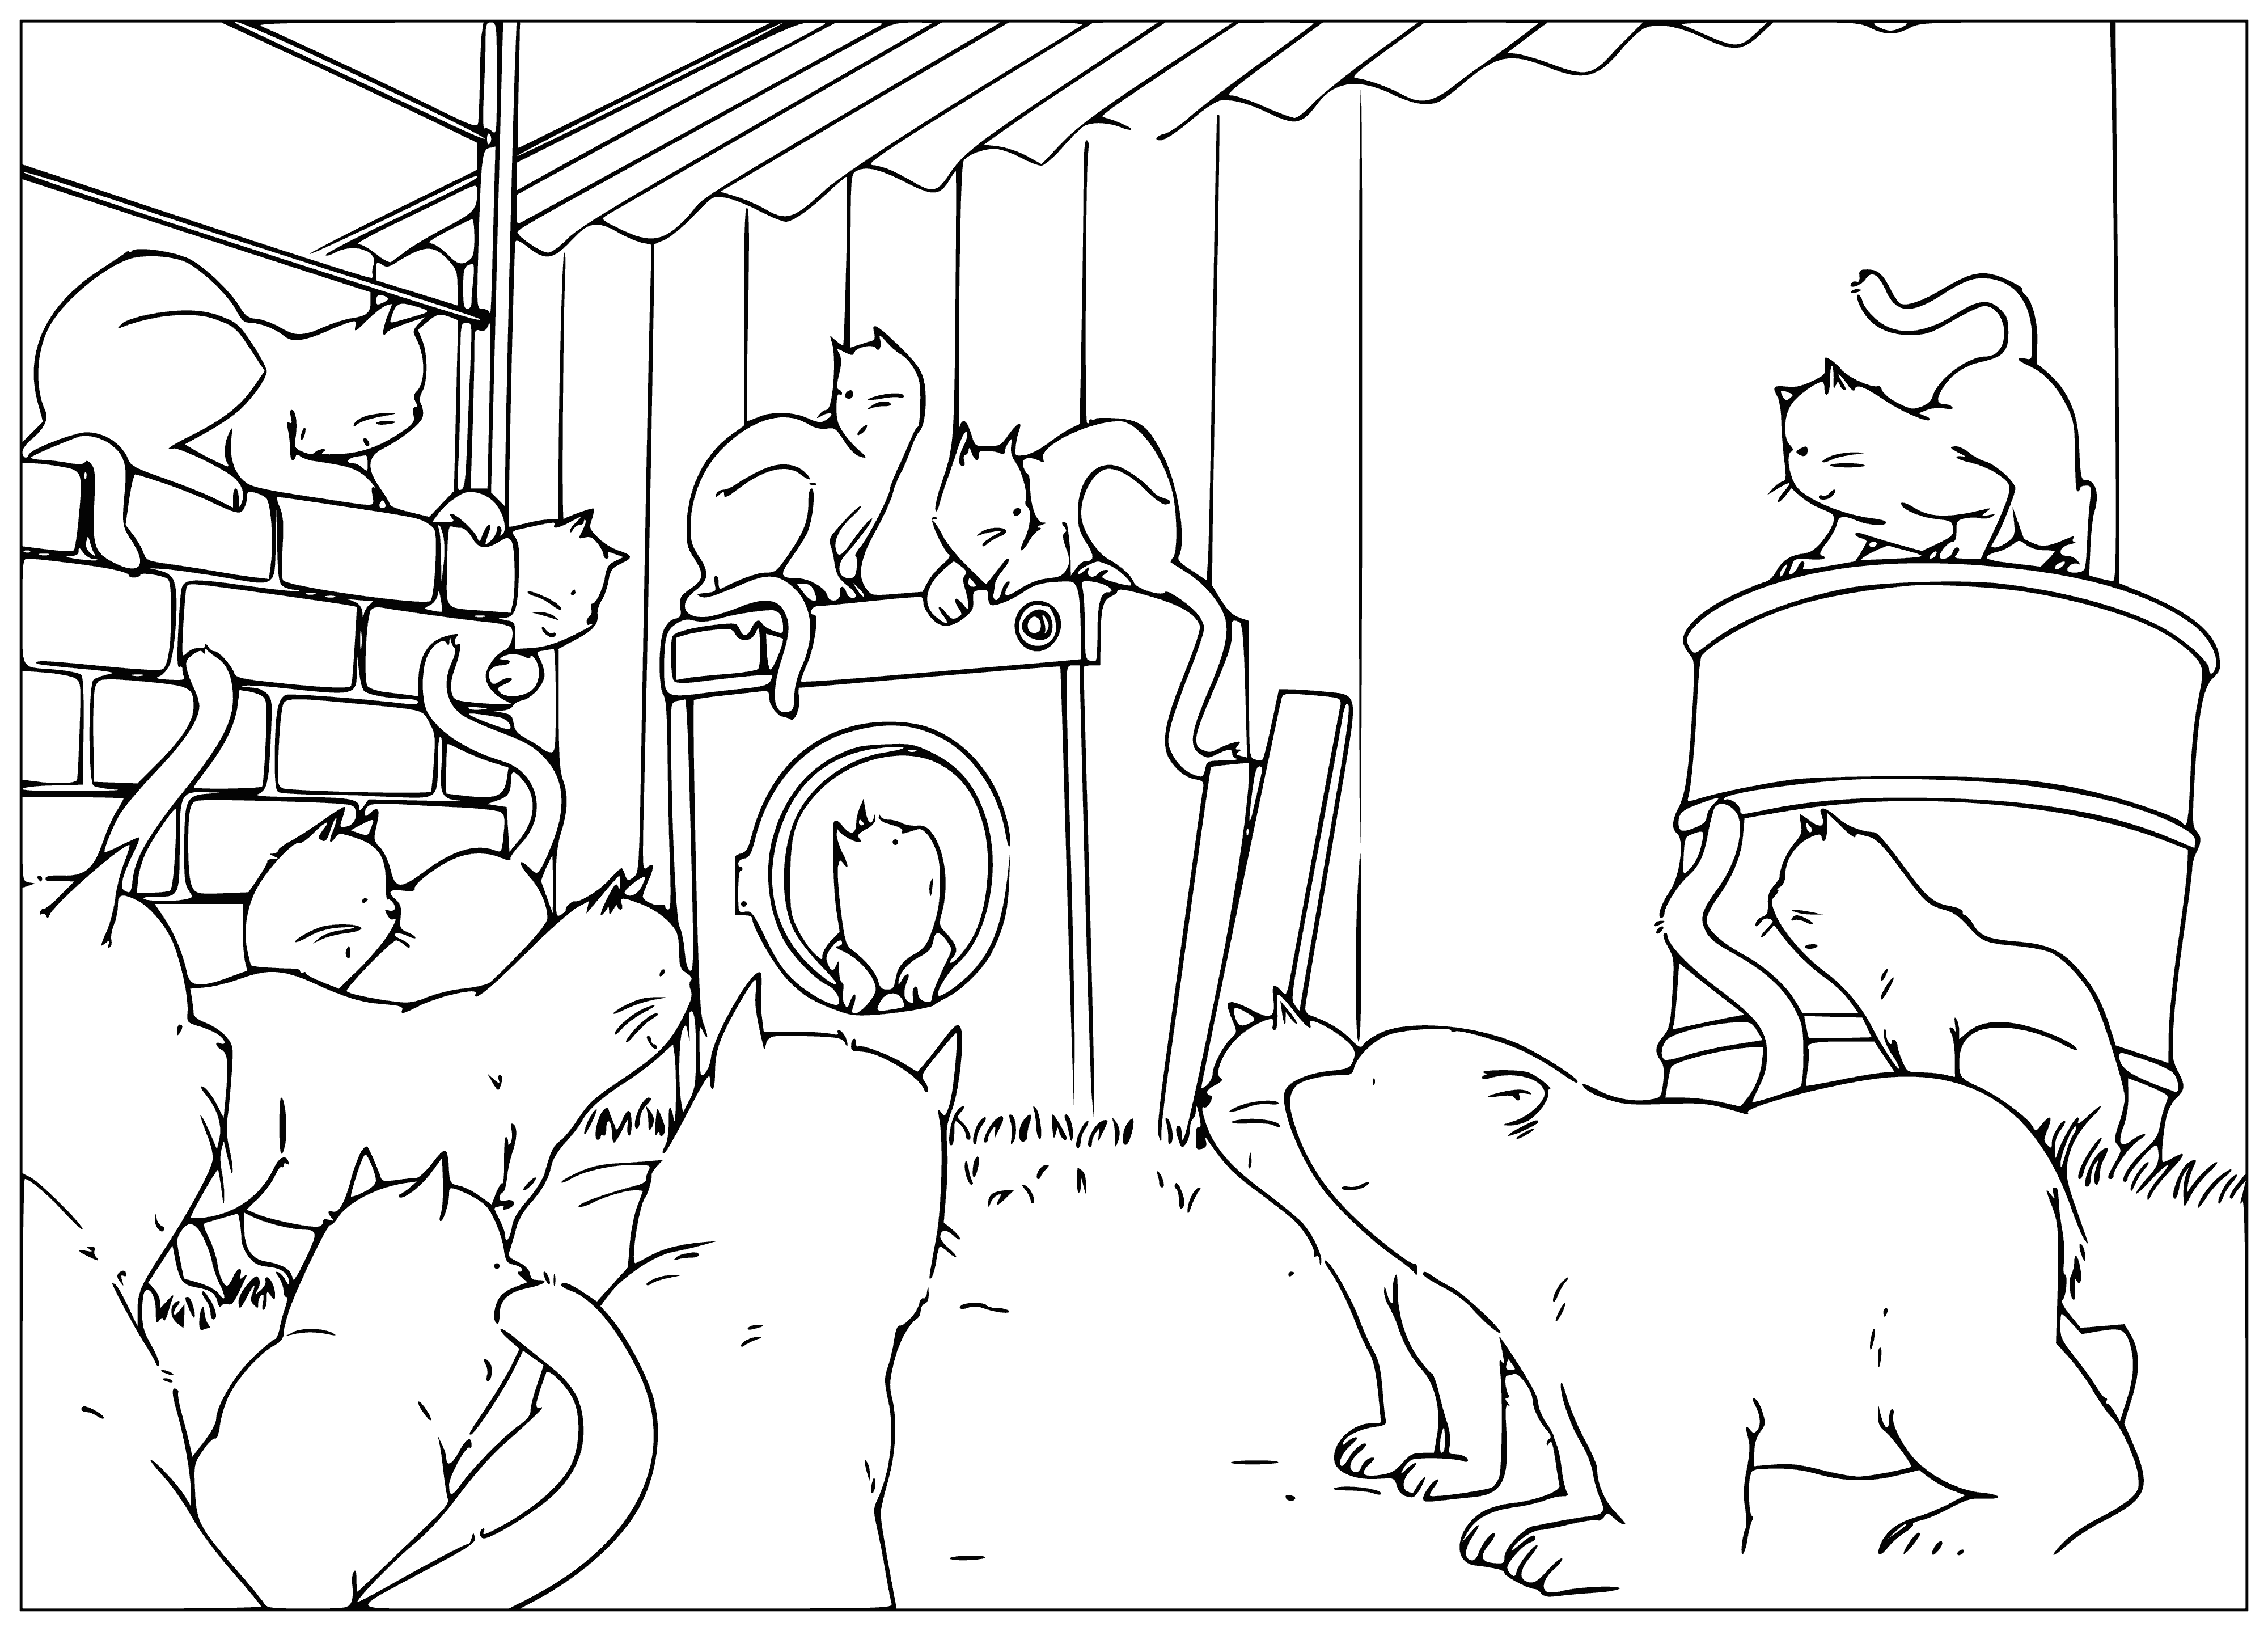 coloring page: Small polar bear sitting on ice surrounded by 3 cats walking towards him.